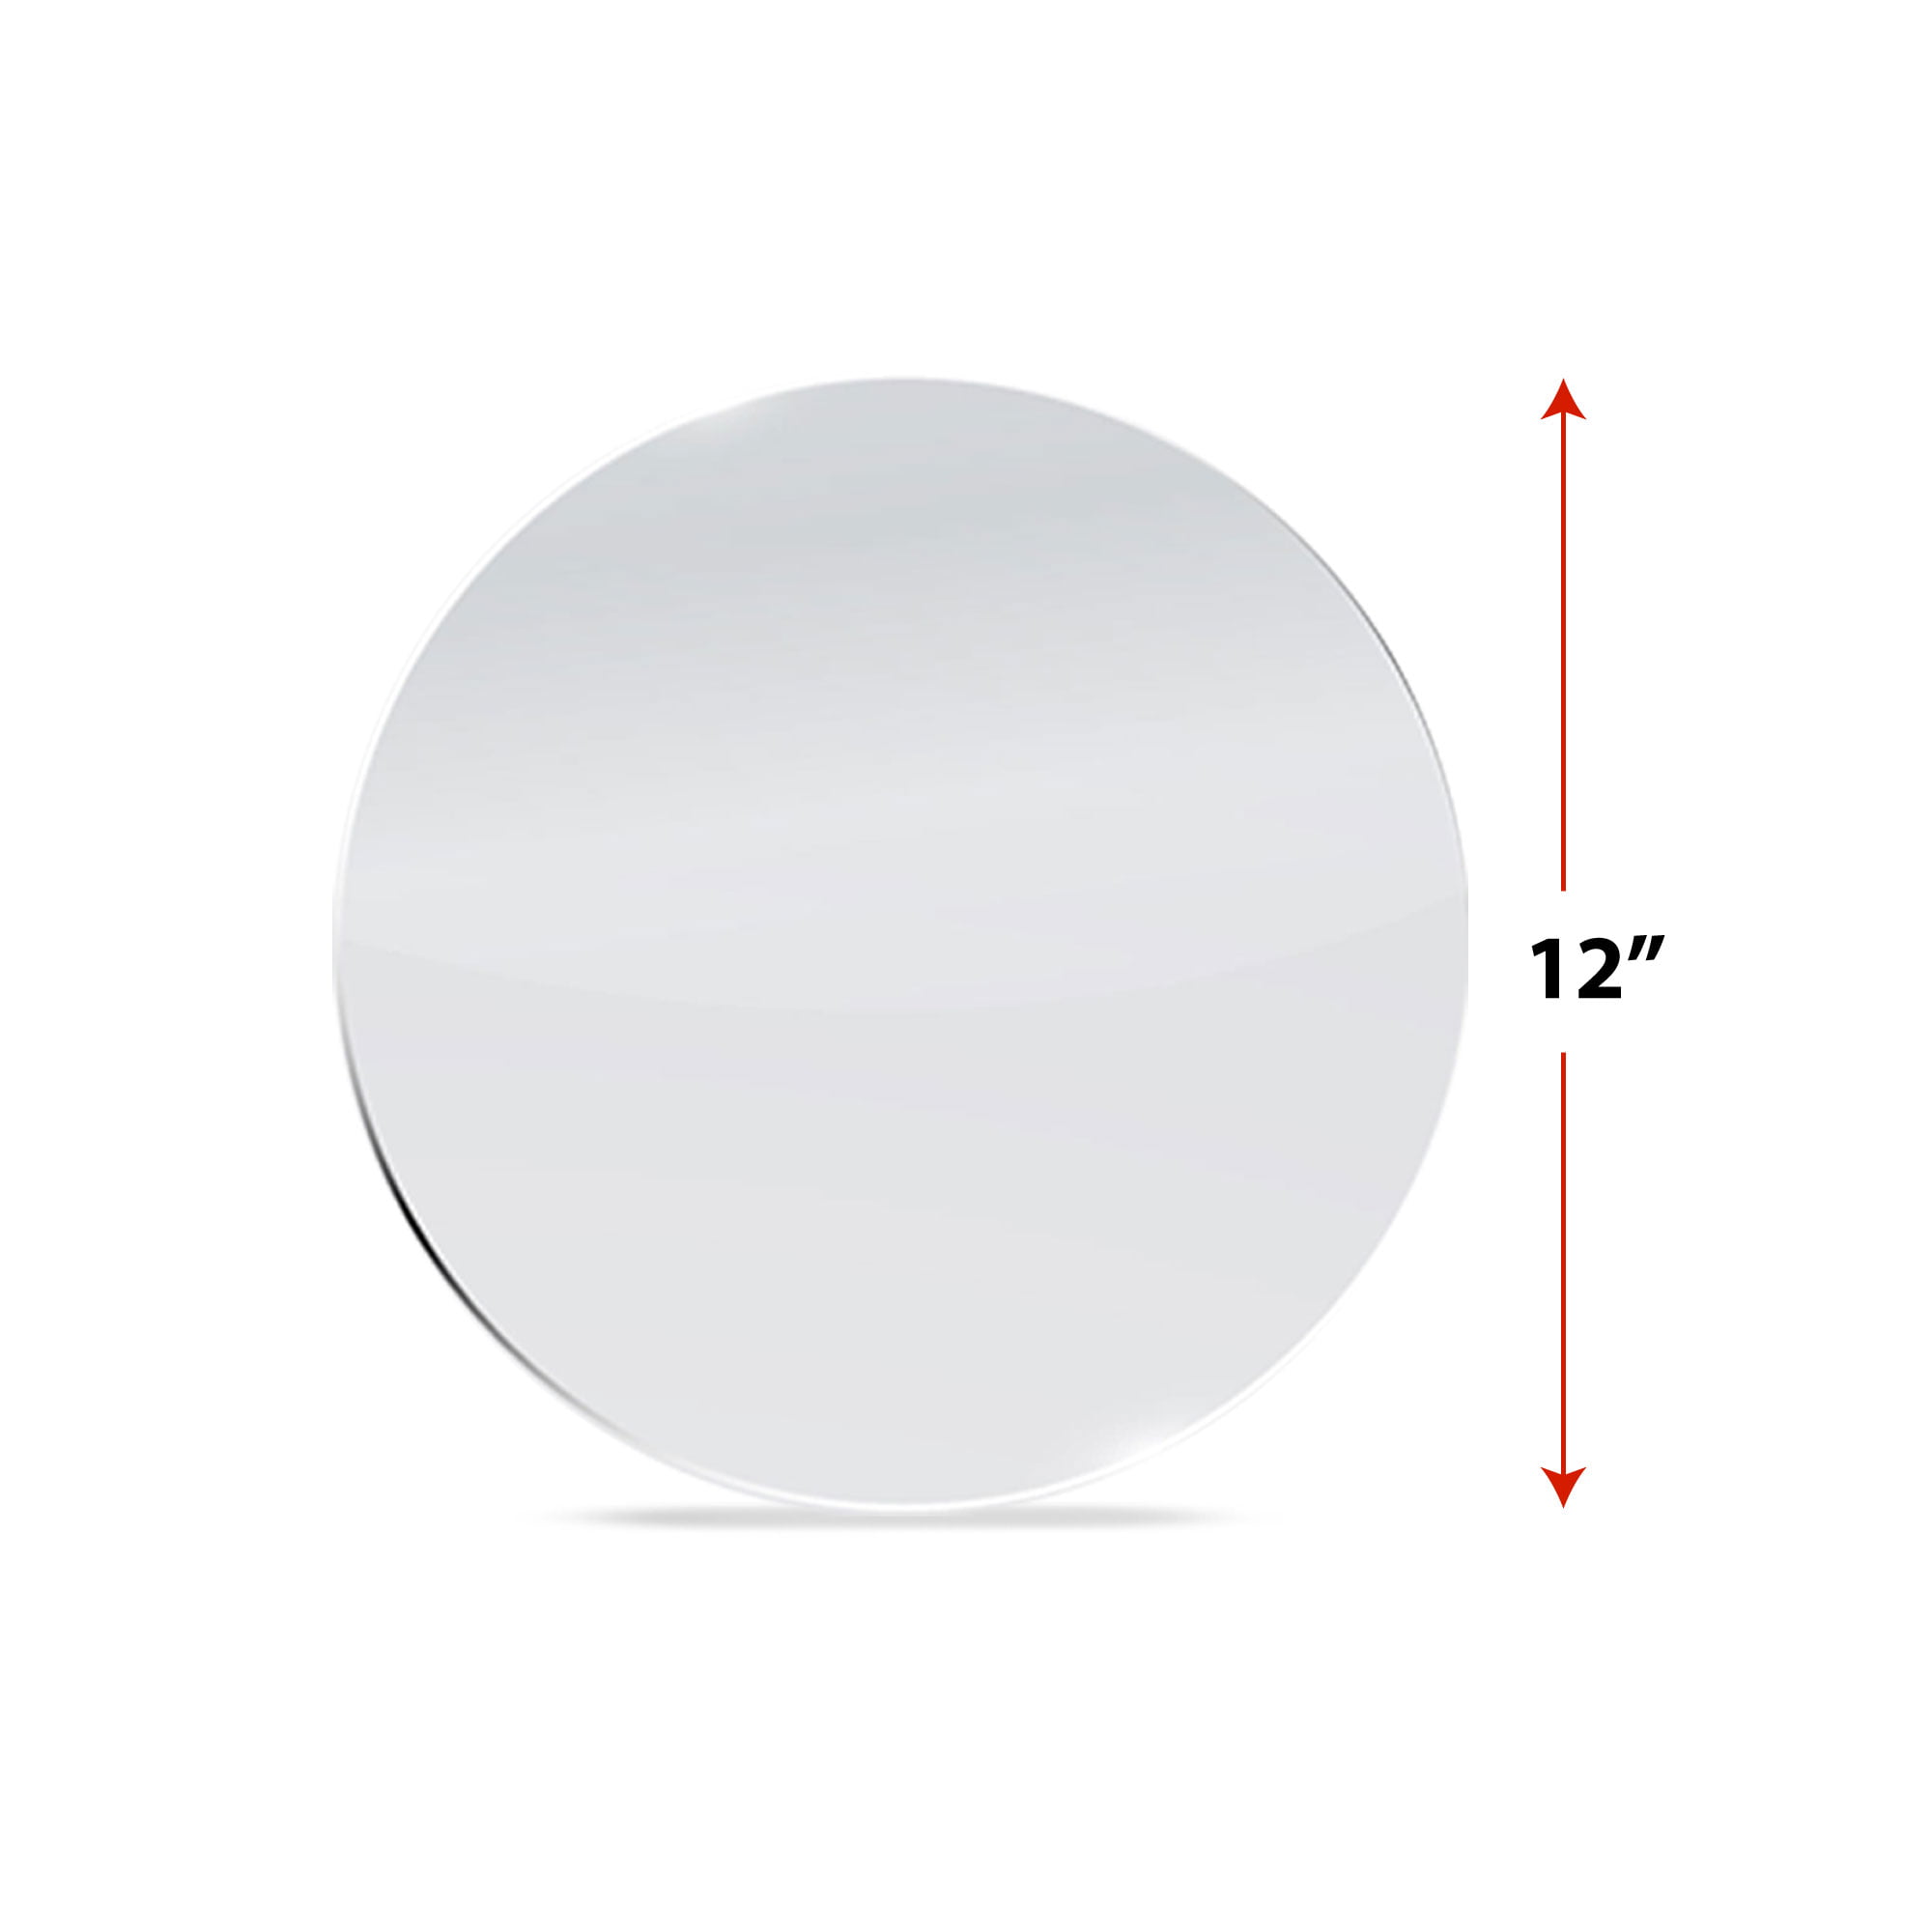 12 round Mirrors for Centerpieces, Circle Mirror Centerpieces for Tables